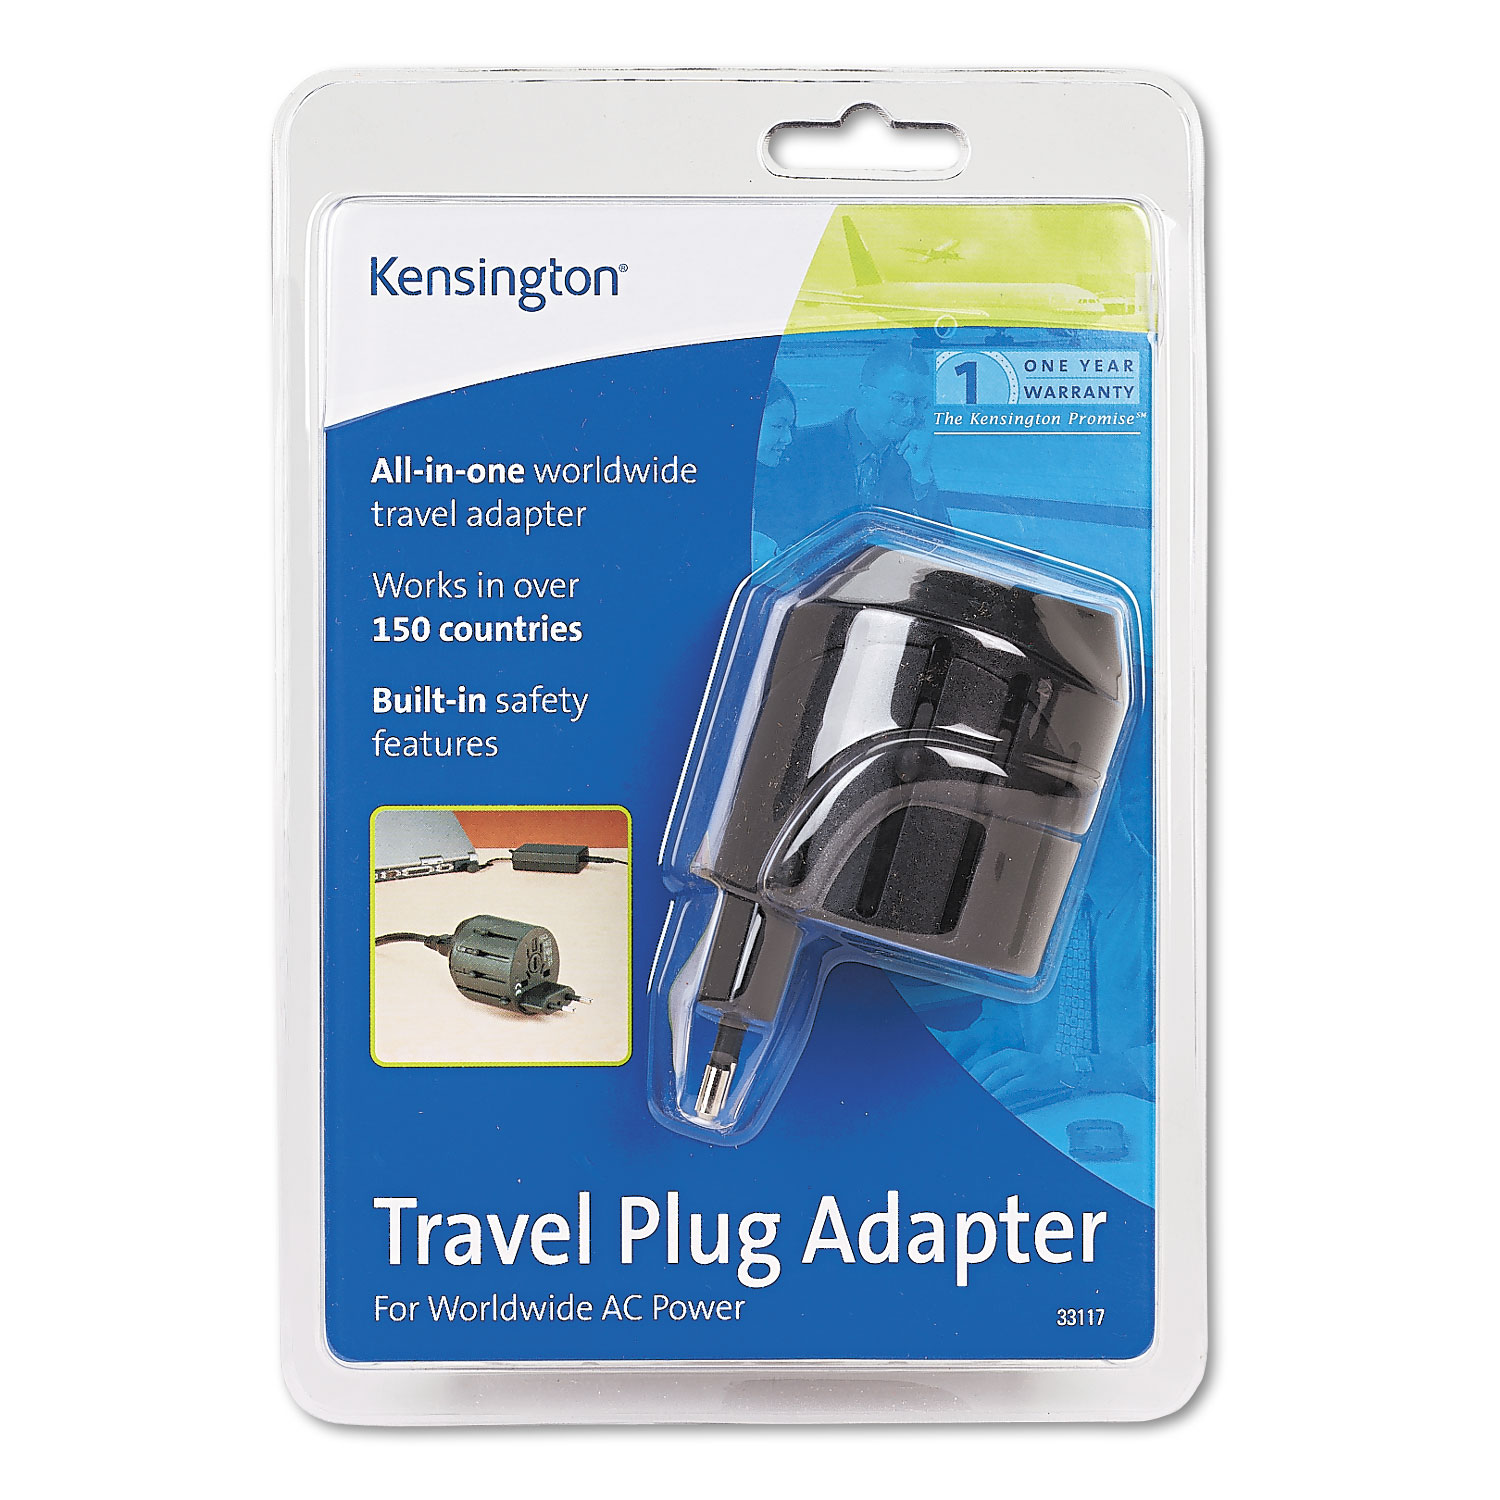 International Travel Plug Adapter for Notebook PC/Cell Phone, 110V